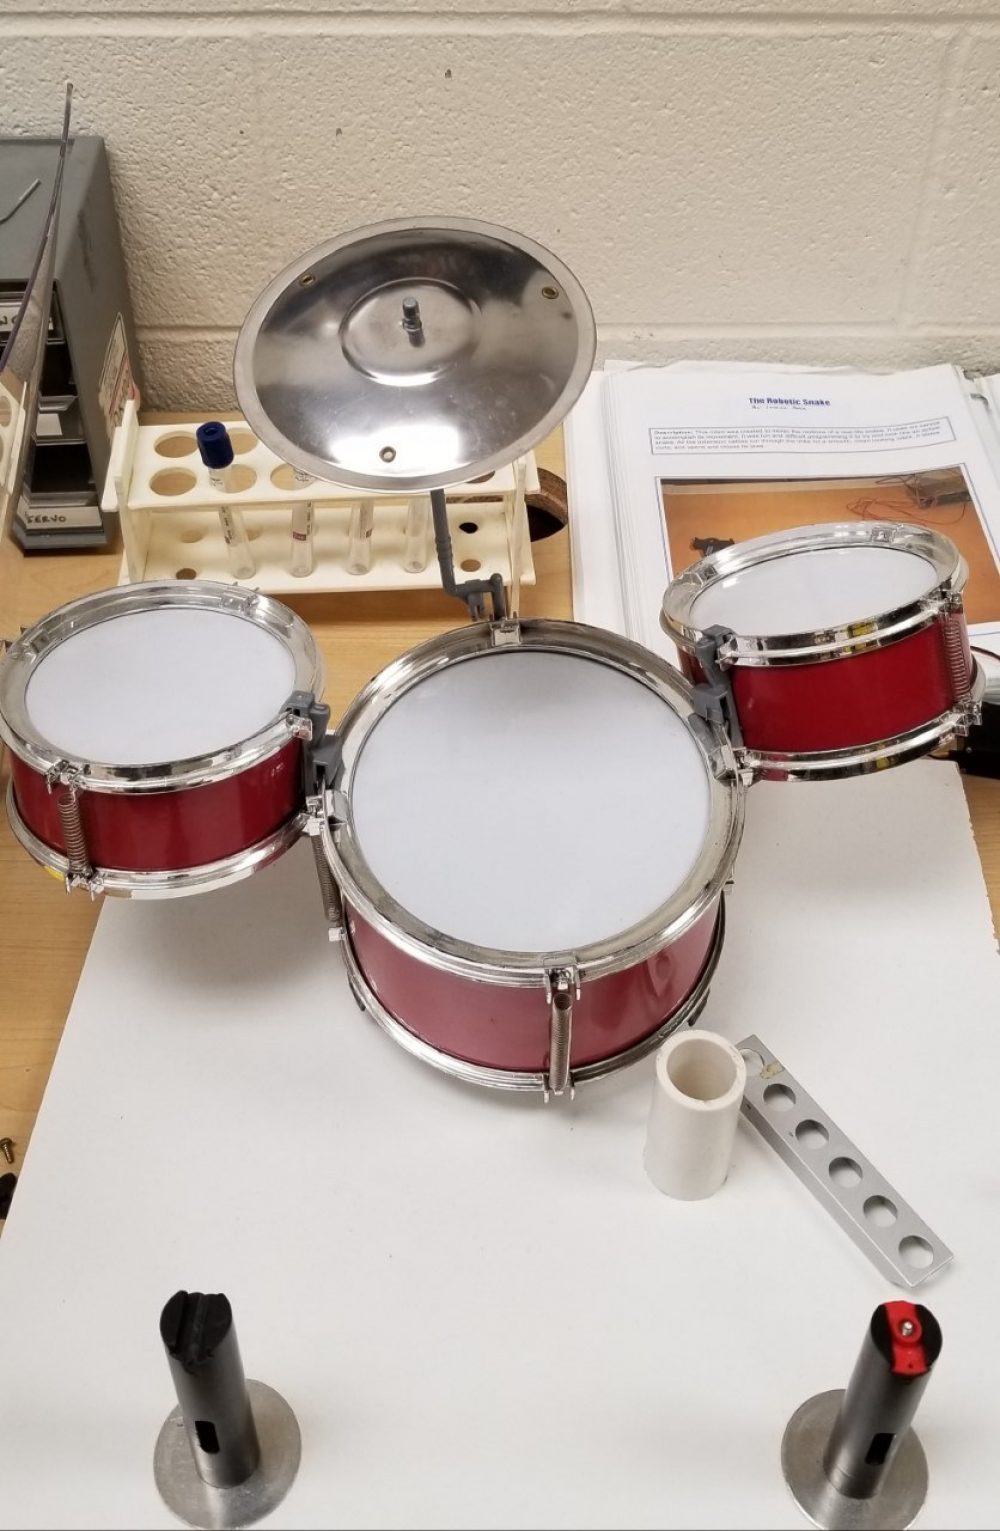 A small drumset